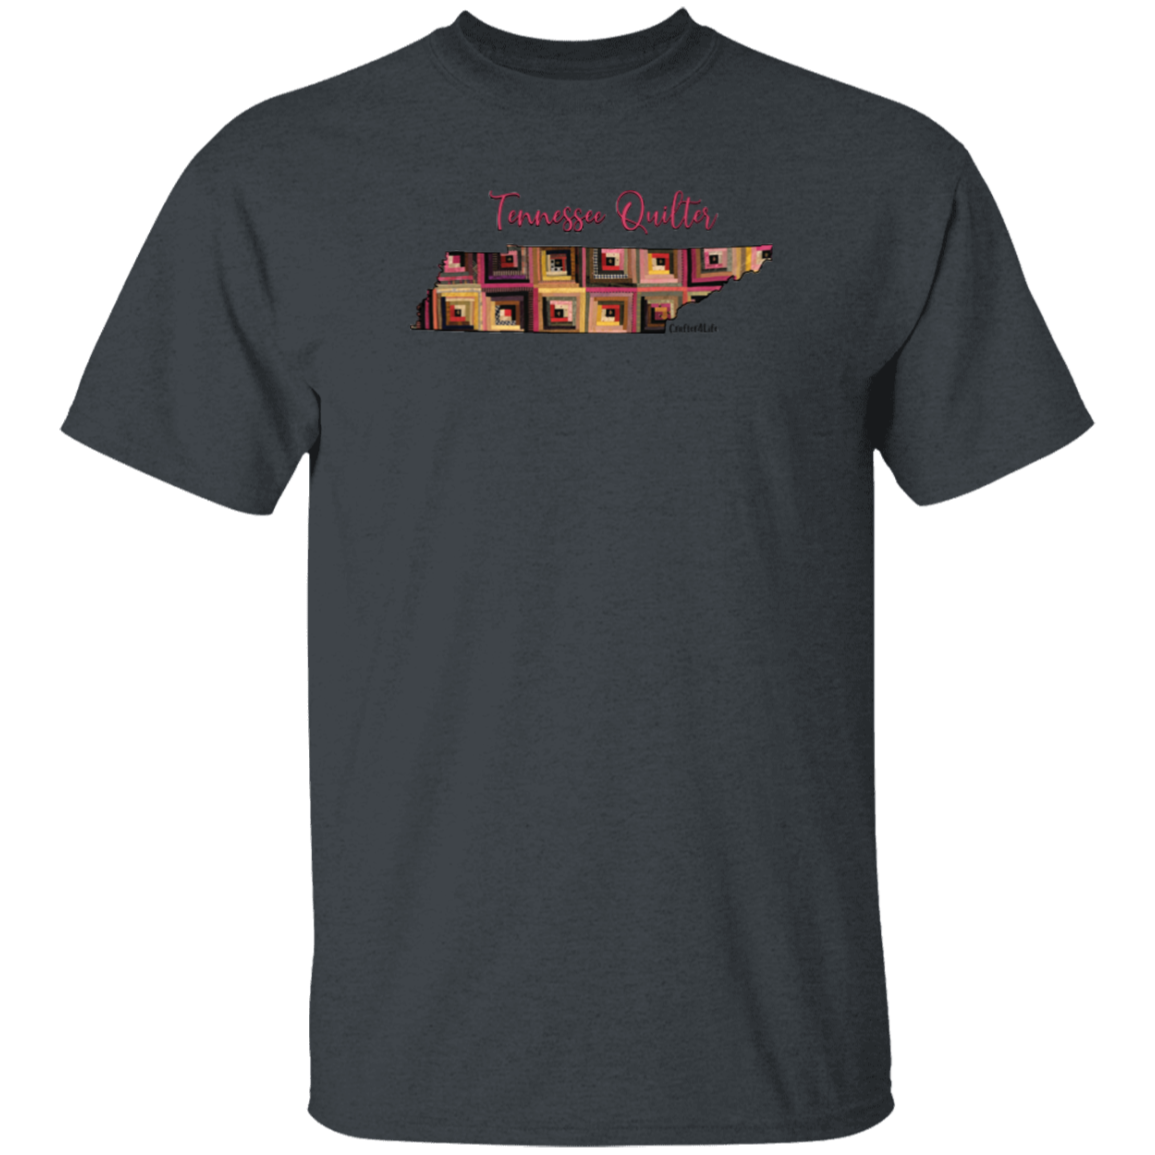 Tennessee Quilter T-Shirt, Gift for Quilting Friends and Family